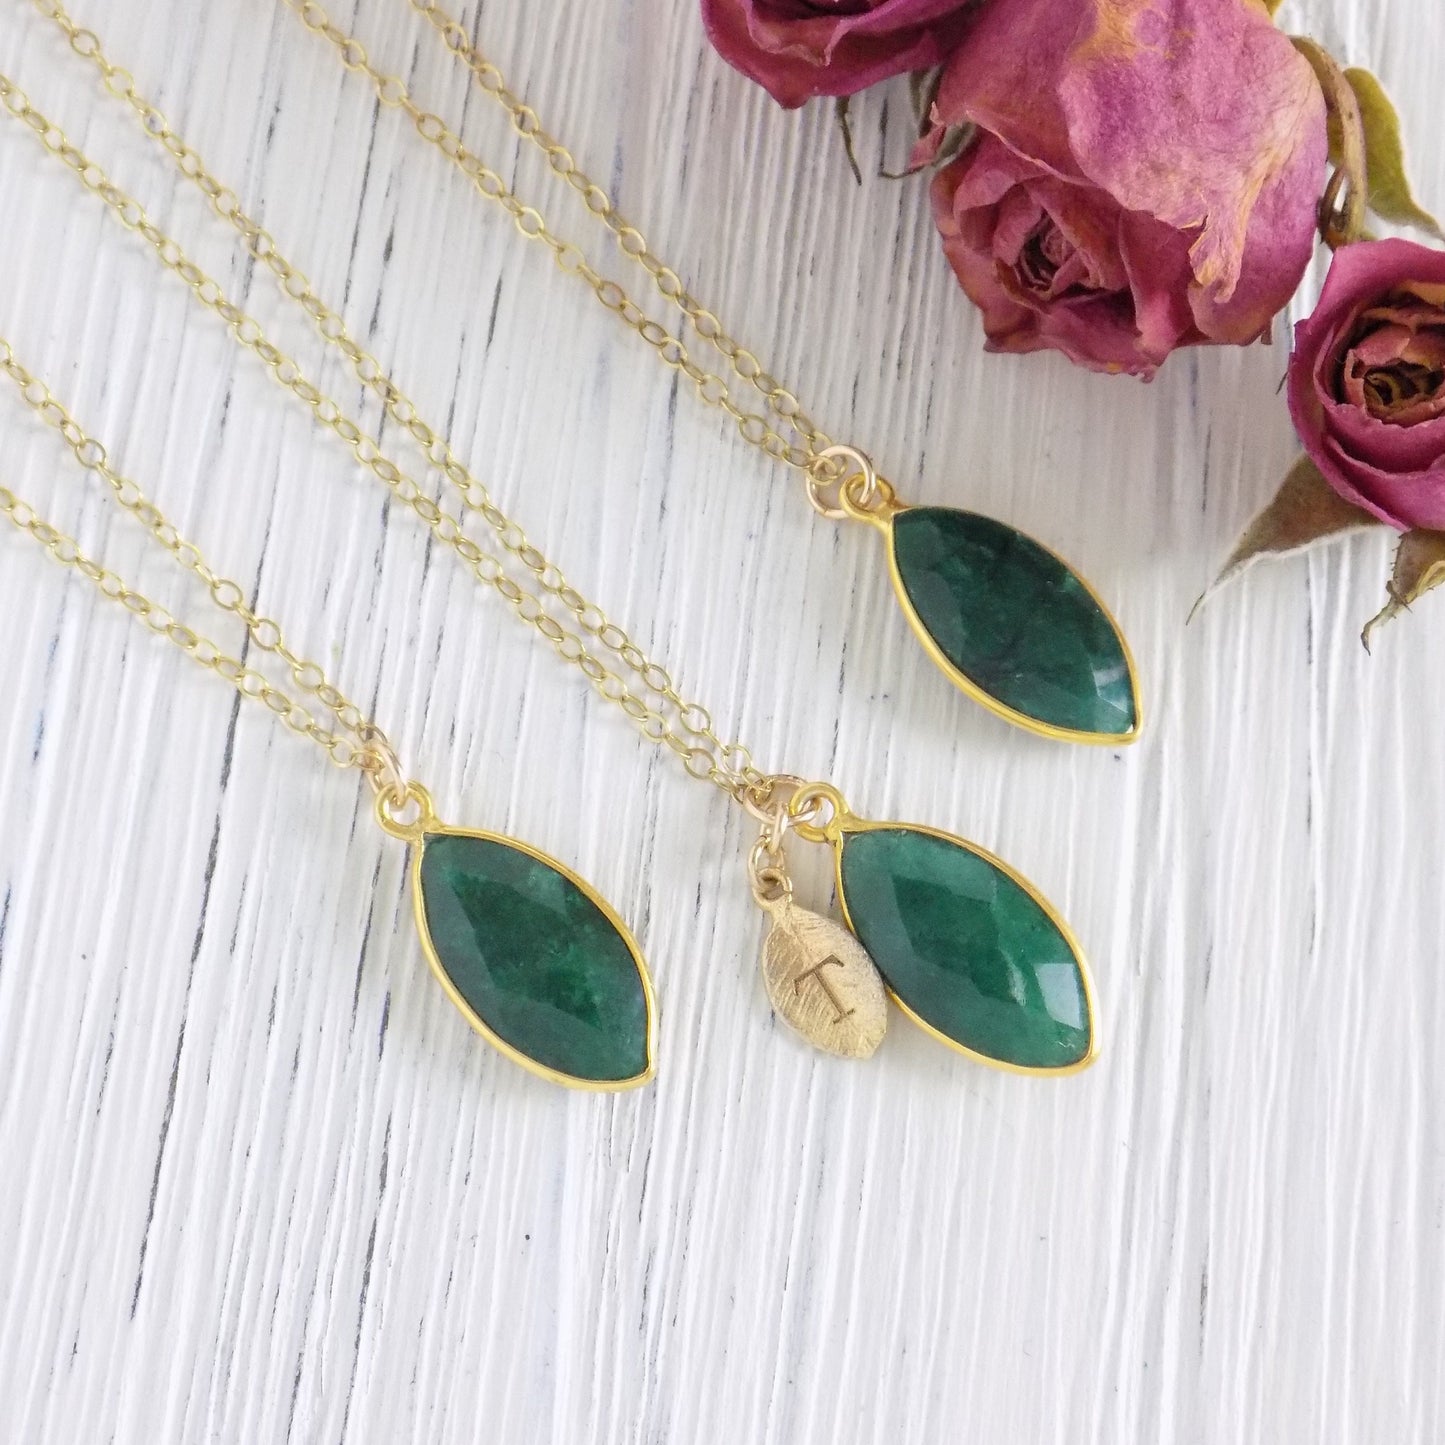 Emerald Necklace - Personalized Emerald Necklace Gold Fill - Raw Emerald - May Birthstone Necklace - Marquise Emerald - Christmas Gift